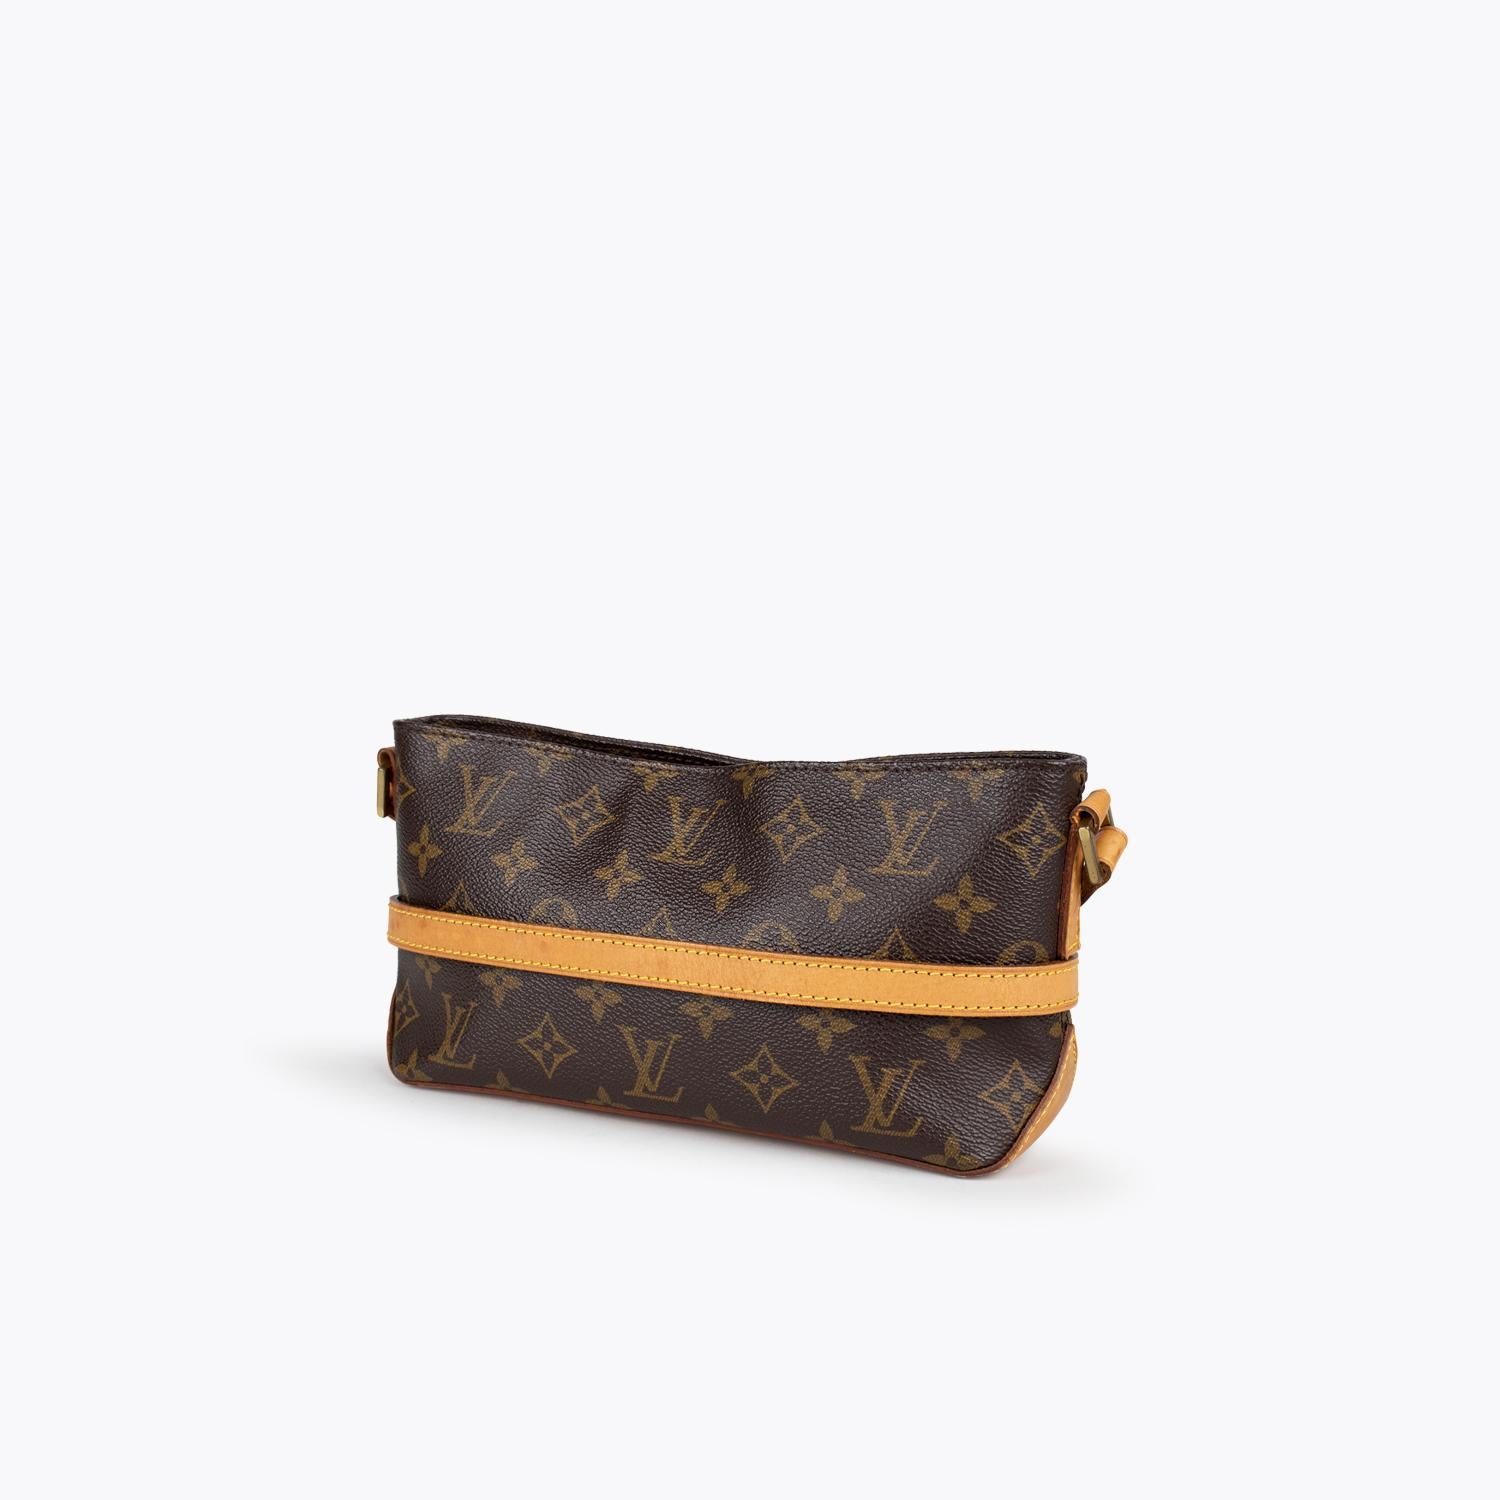 Brown and tan monogram coated canvas Louis Vuitton Trotteur crossbody bag with

- Brass hardware
- Single flat shoulder strap
- Tan vachetta leather trim
- Brown canvas lining, single zip pocket at interior walls and zip closure at top

Overall